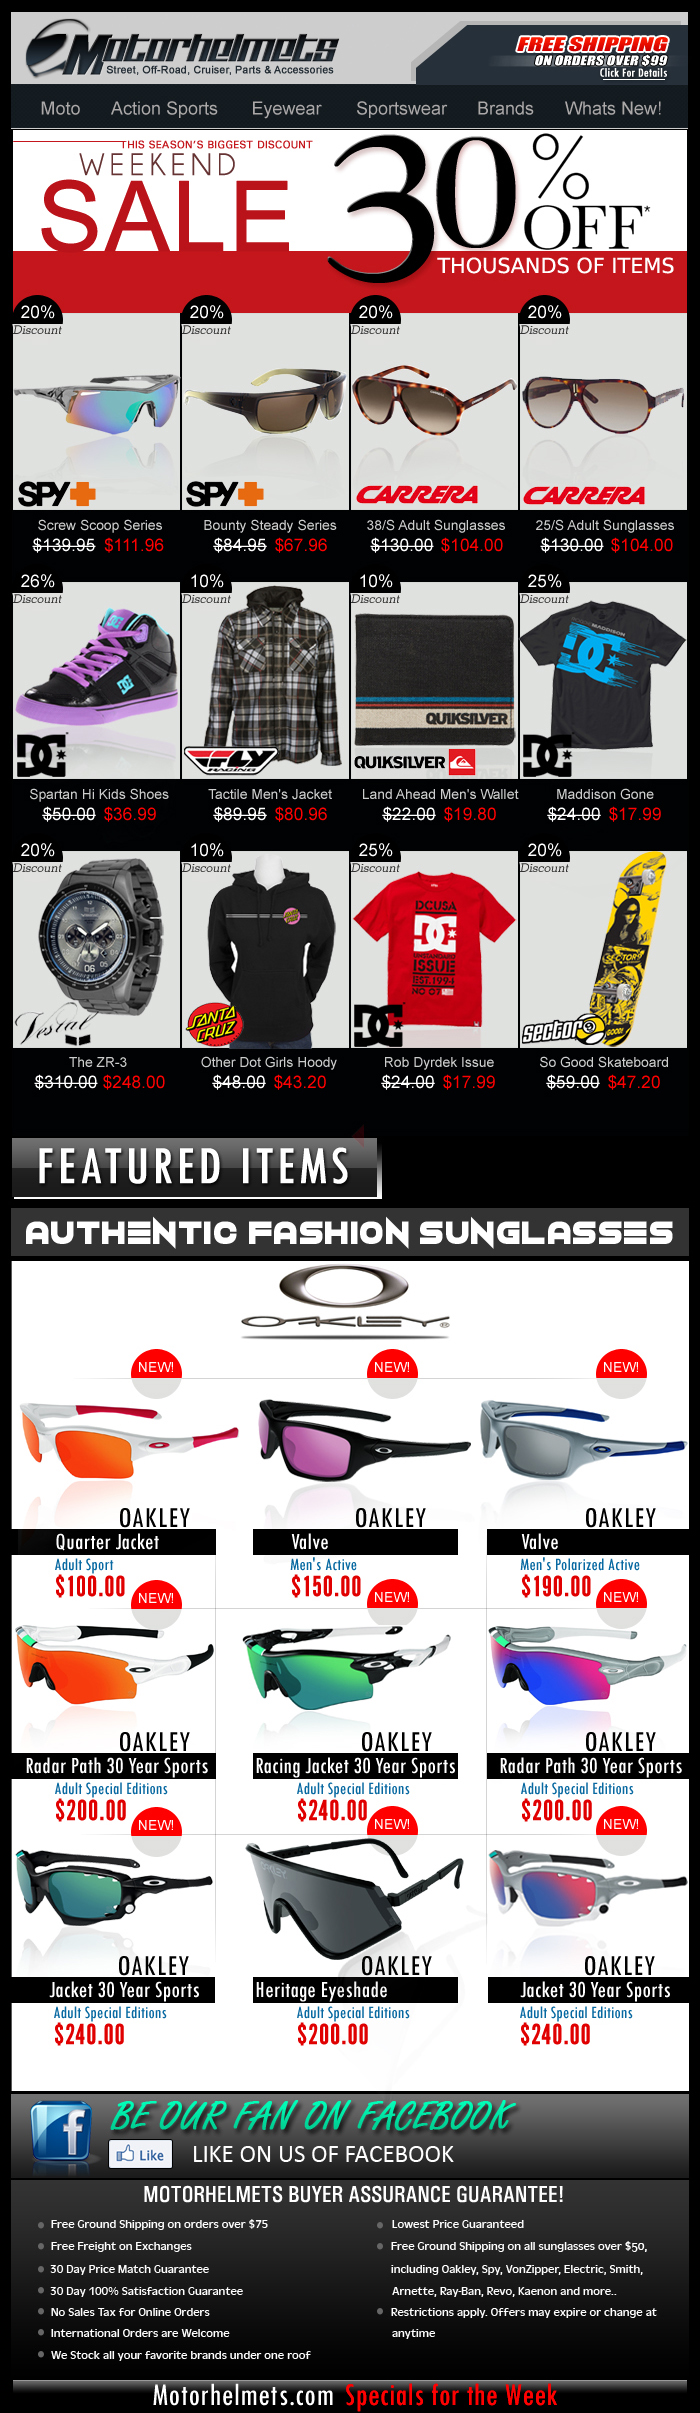 Up to 30% Savings on Premium Eyewear and Apparel from Spy, DC, Carrera and More!